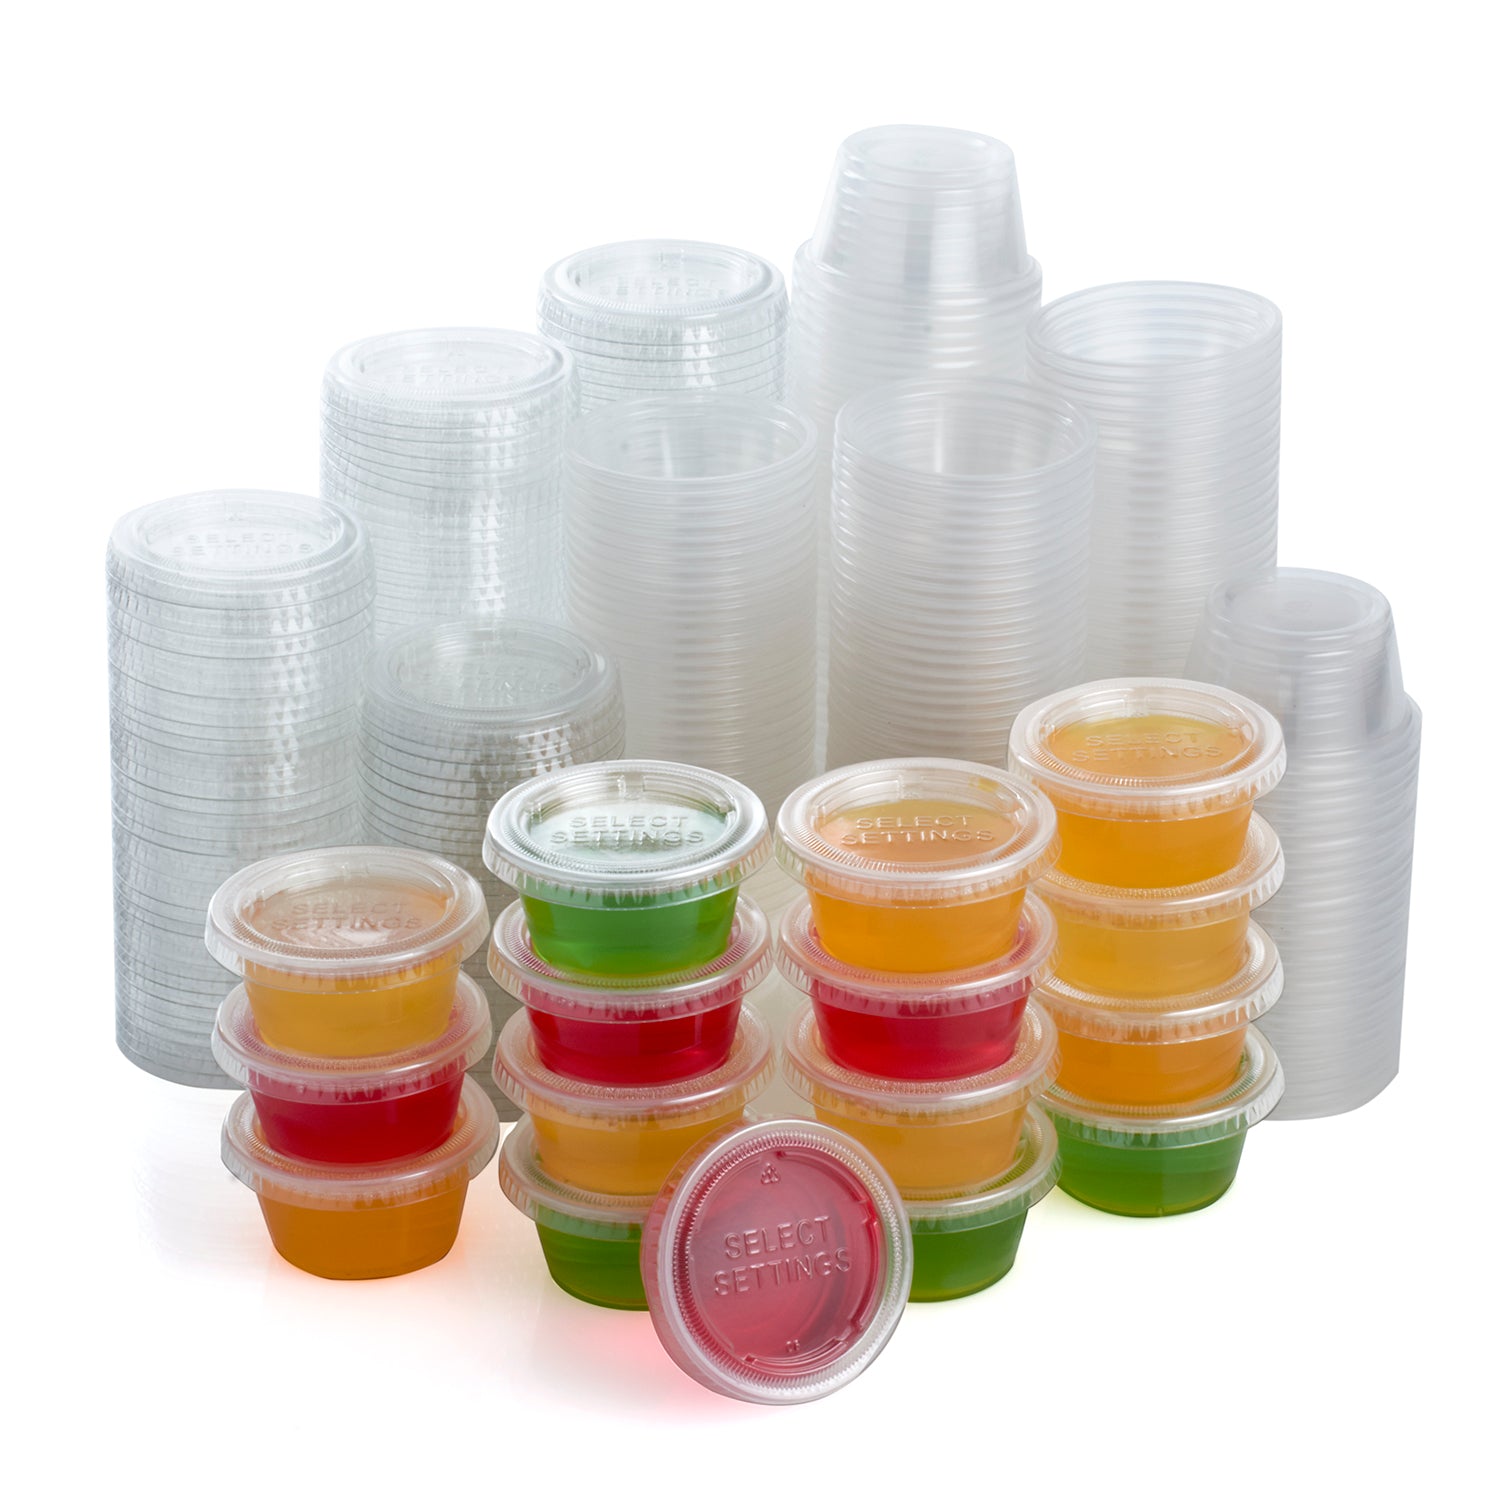 Jello shot cups / Portion Cups 200 Cups + 200 Lids & Free Shipping